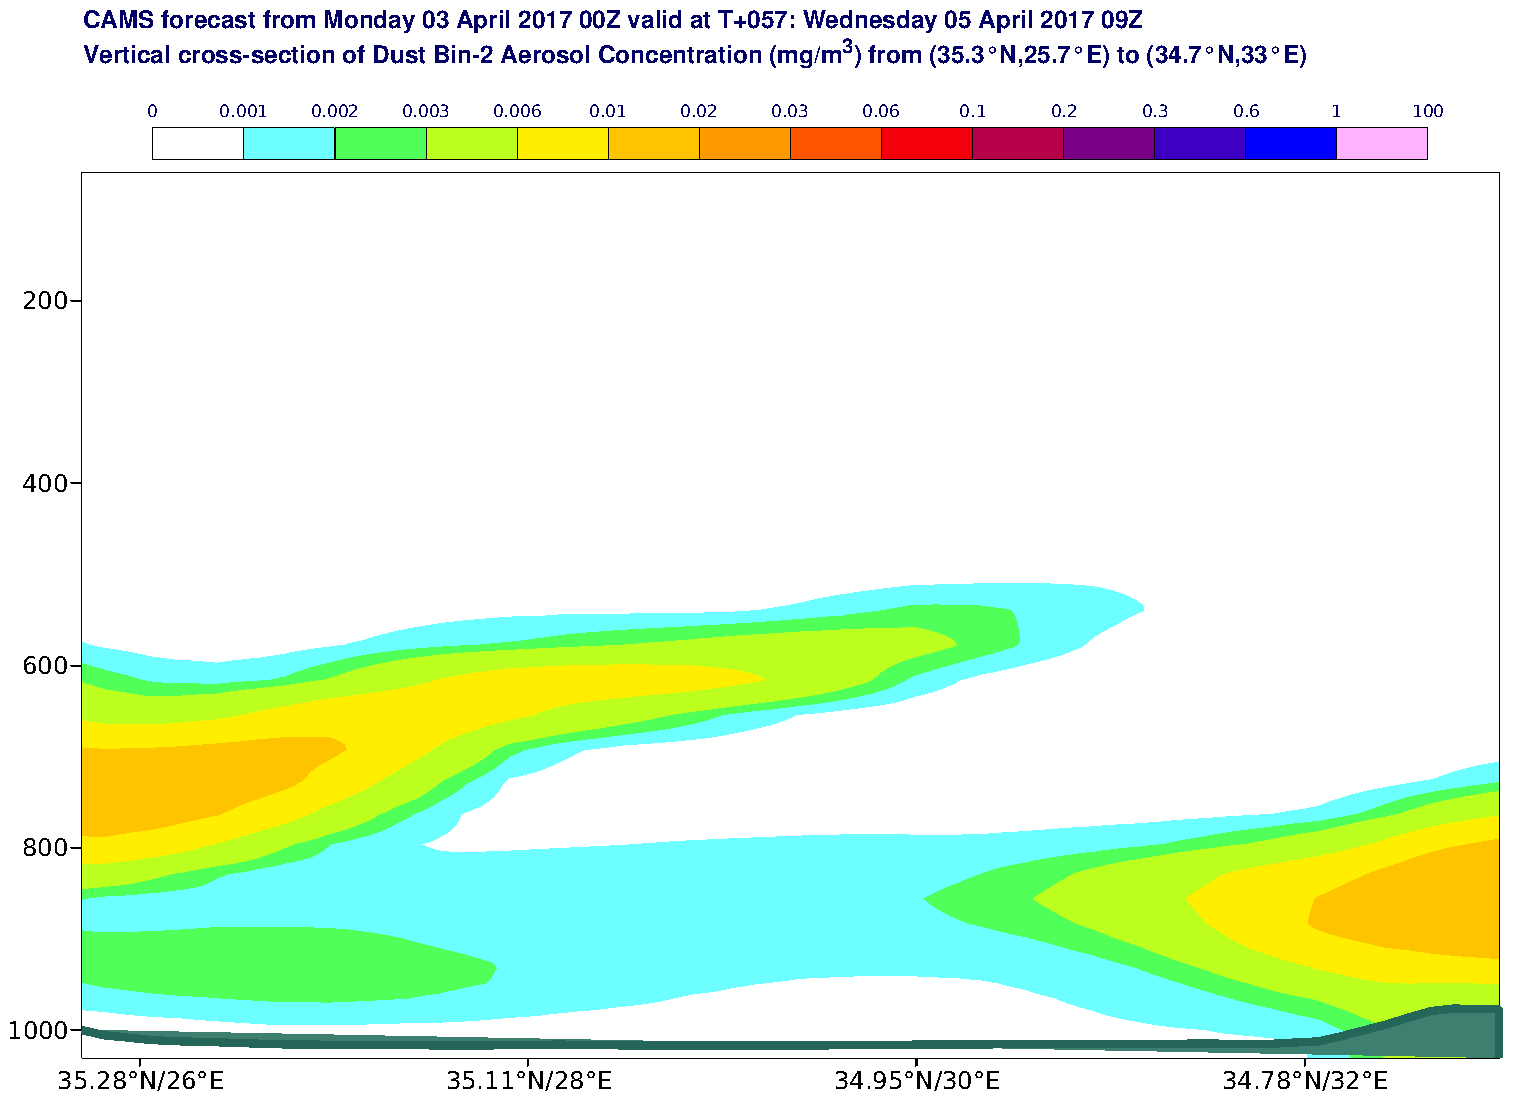 Vertical cross-section of Dust Bin-2 Aerosol Concentration (mg/m3) valid at T57 - 2017-04-05 09:00